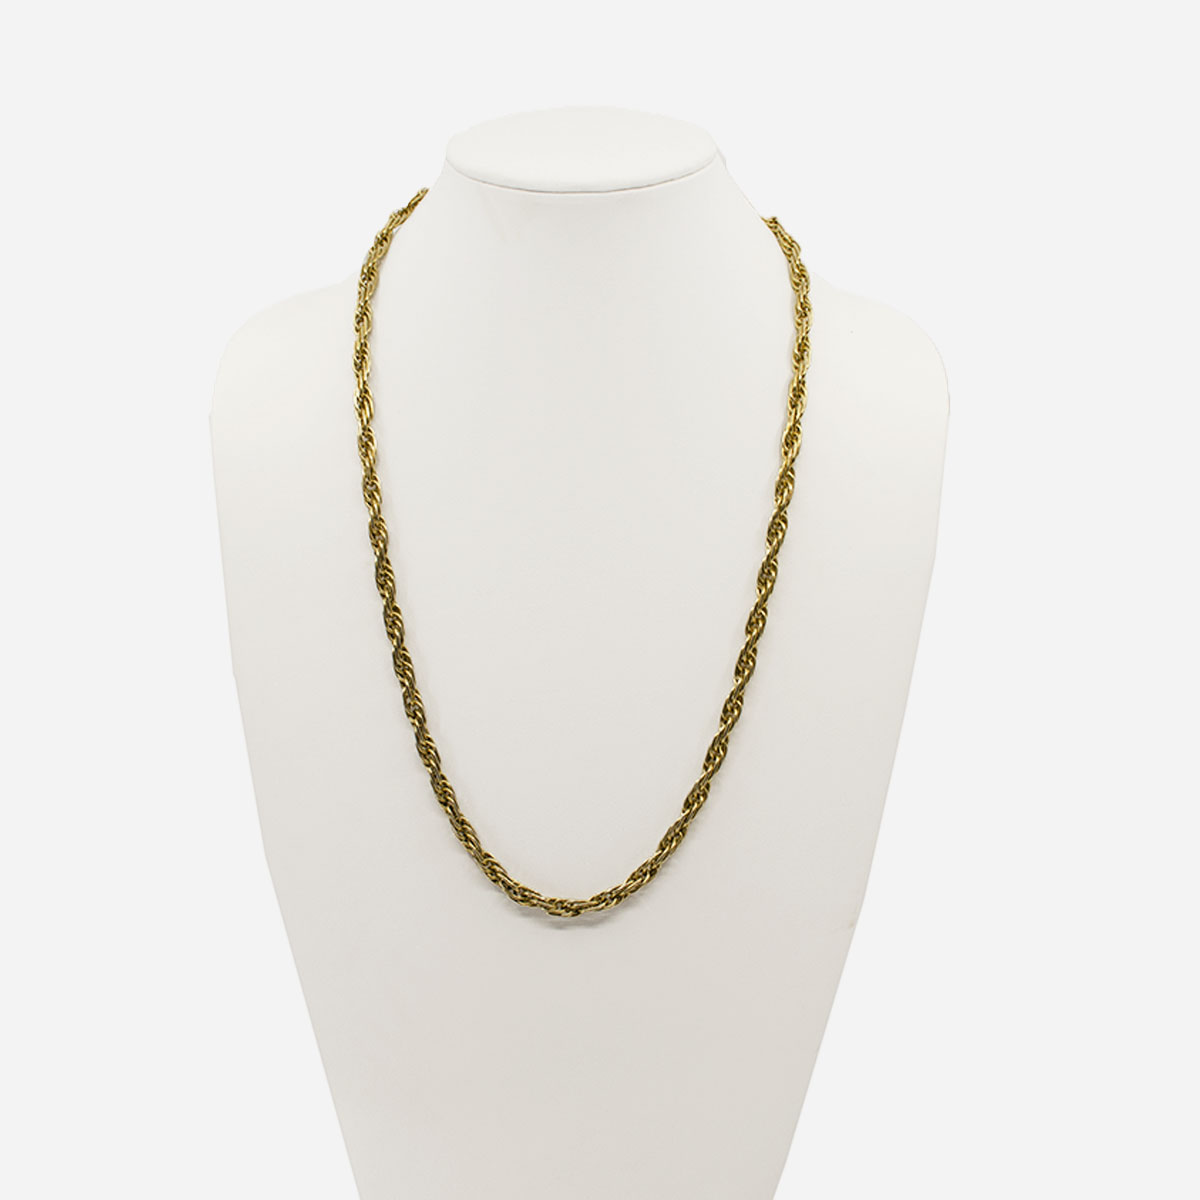 Monet Rope Chain Gold Necklace. 26"